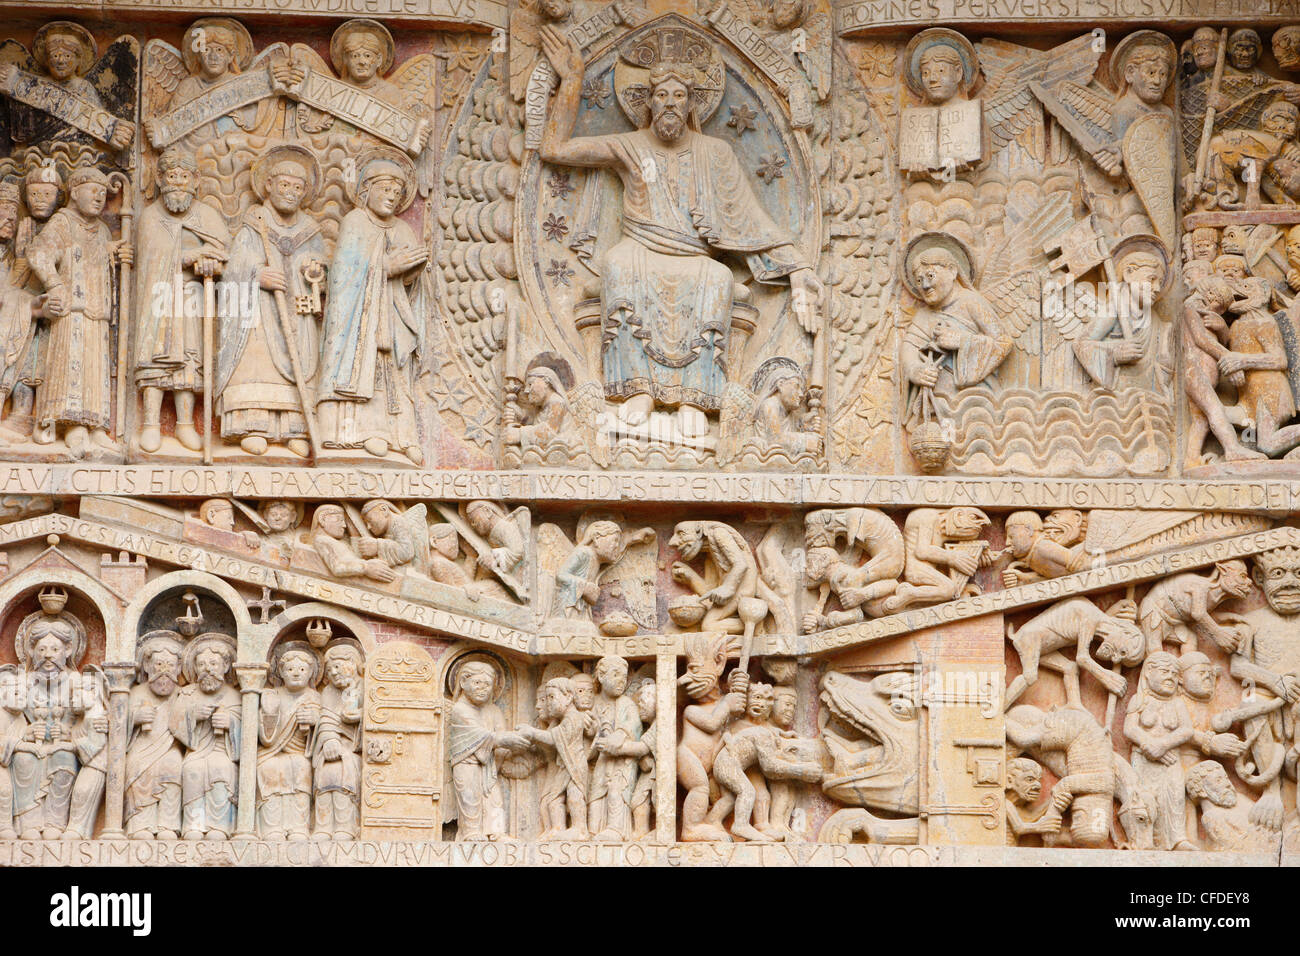 Tympanum showing Christ in Glory and the Last Judgment, Sainte Foy Abbey church, Conques, Aveyron, Massif Central, France Stock Photo